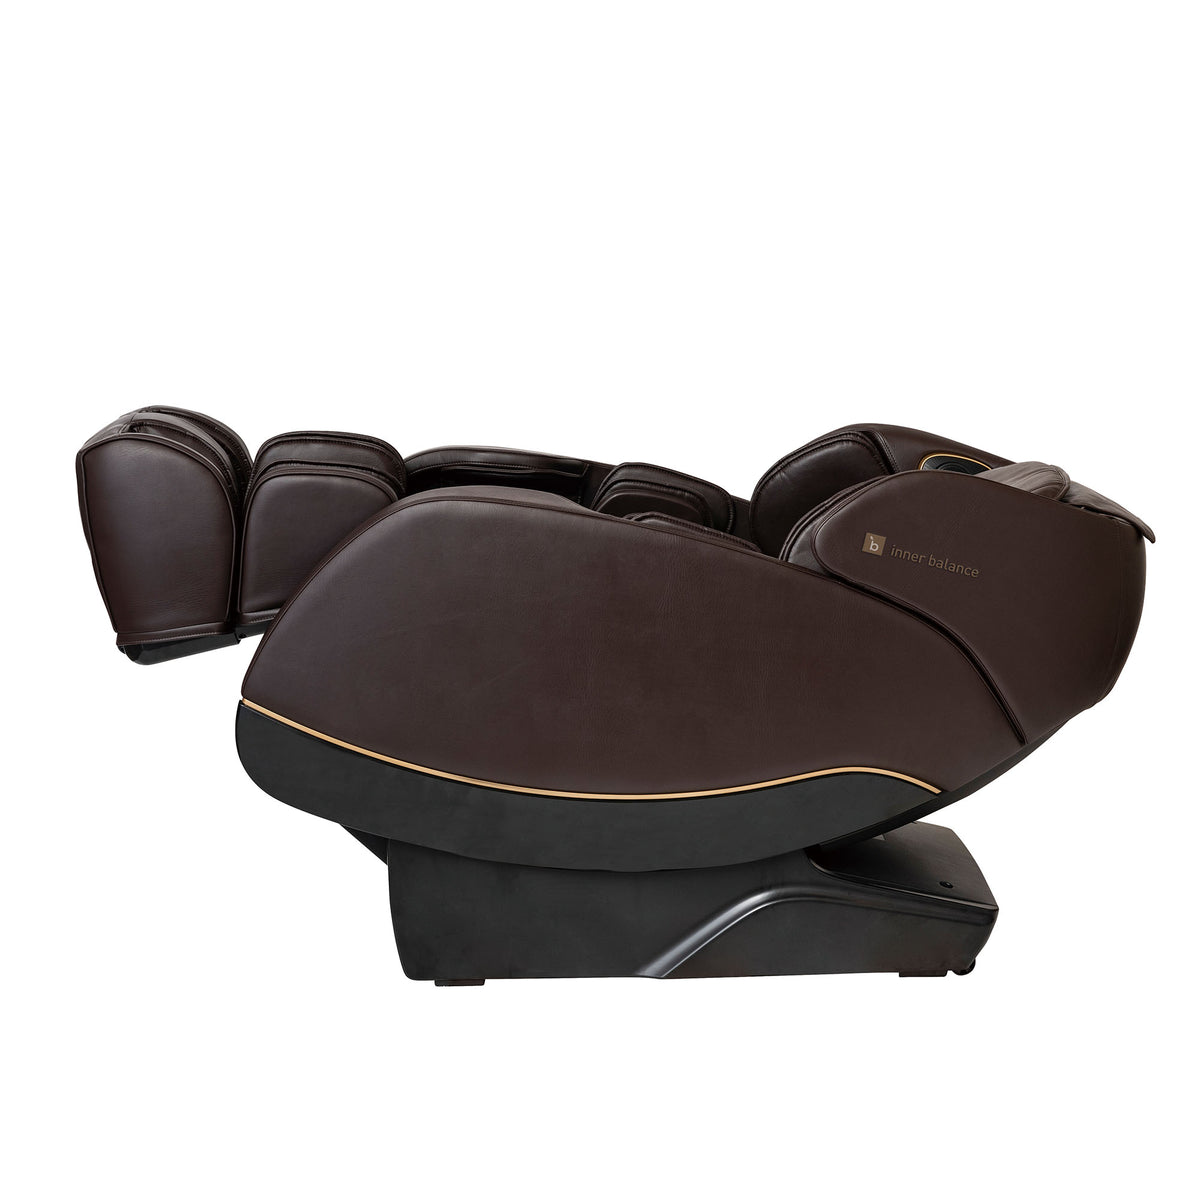 A fully zero-gravity reclined Inner Balance Wellness Jin 2.0 Massage Chair in a luxurious brown finish